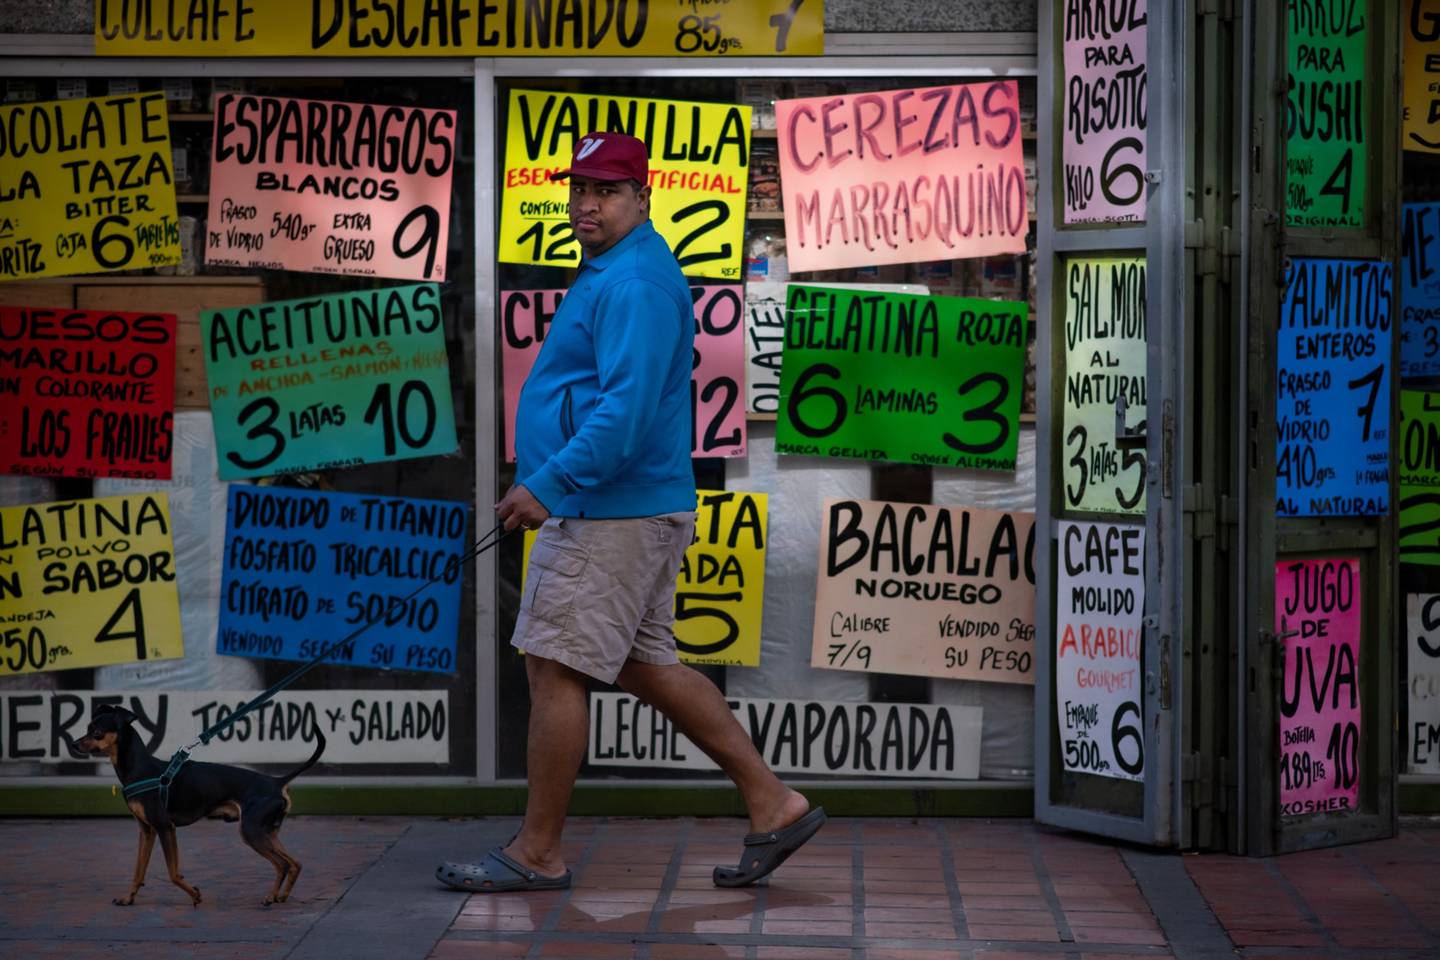 A grocery store displays prices in US dollars in the La Candelaria neighborhood of Caracas.